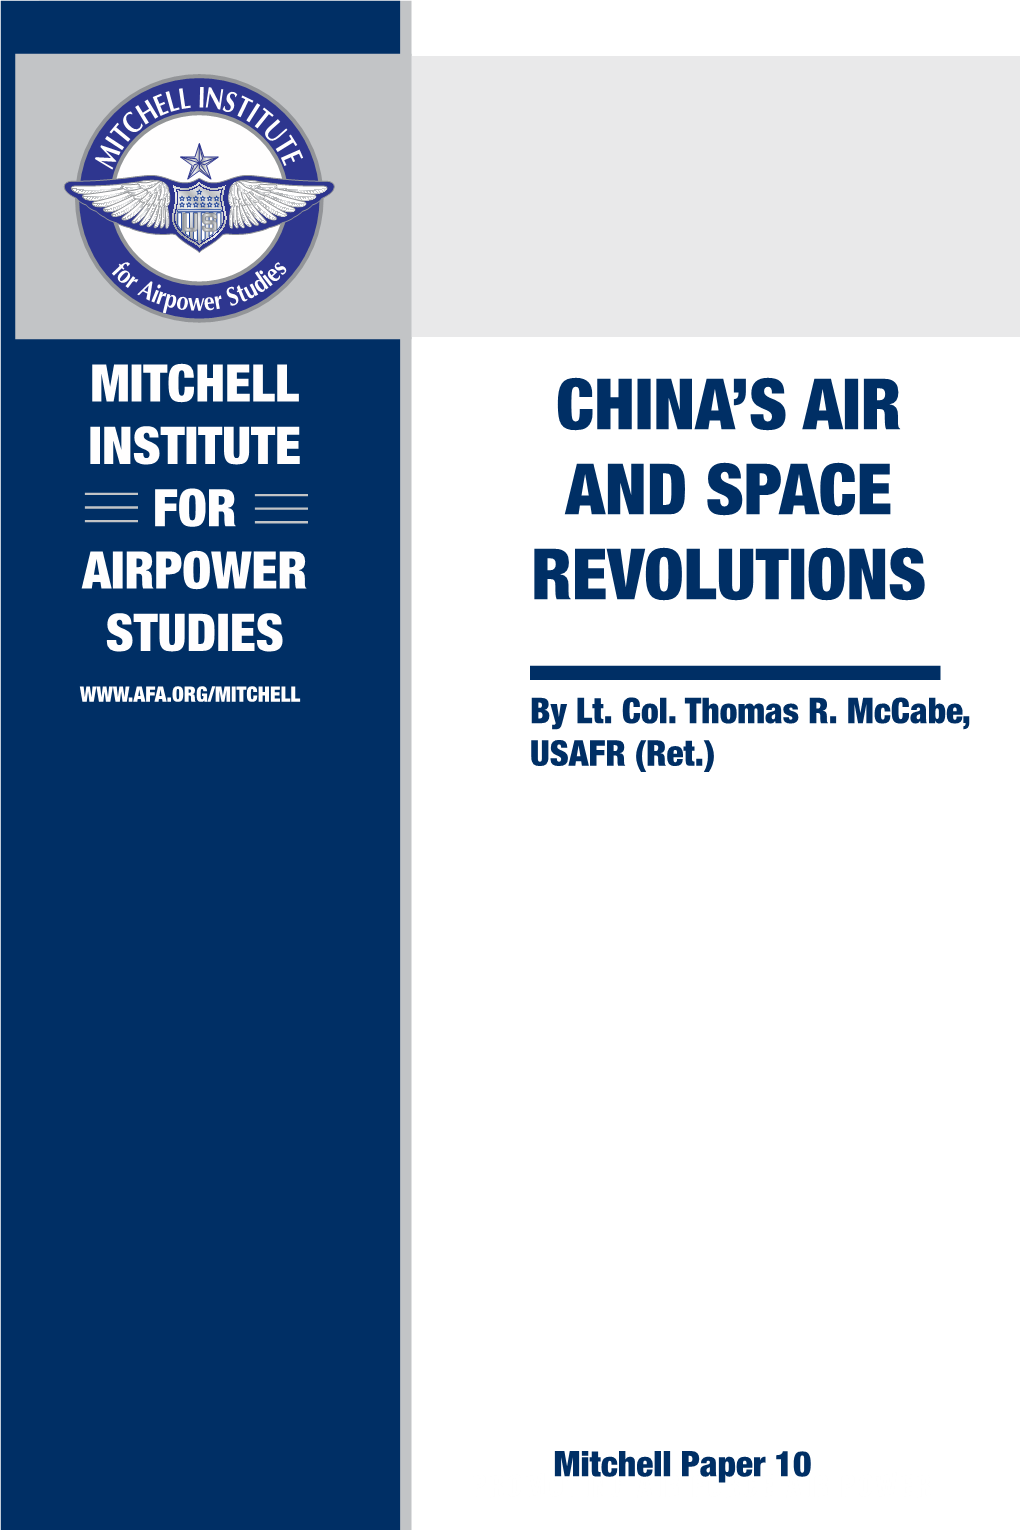 China's Air and Space Revolutions